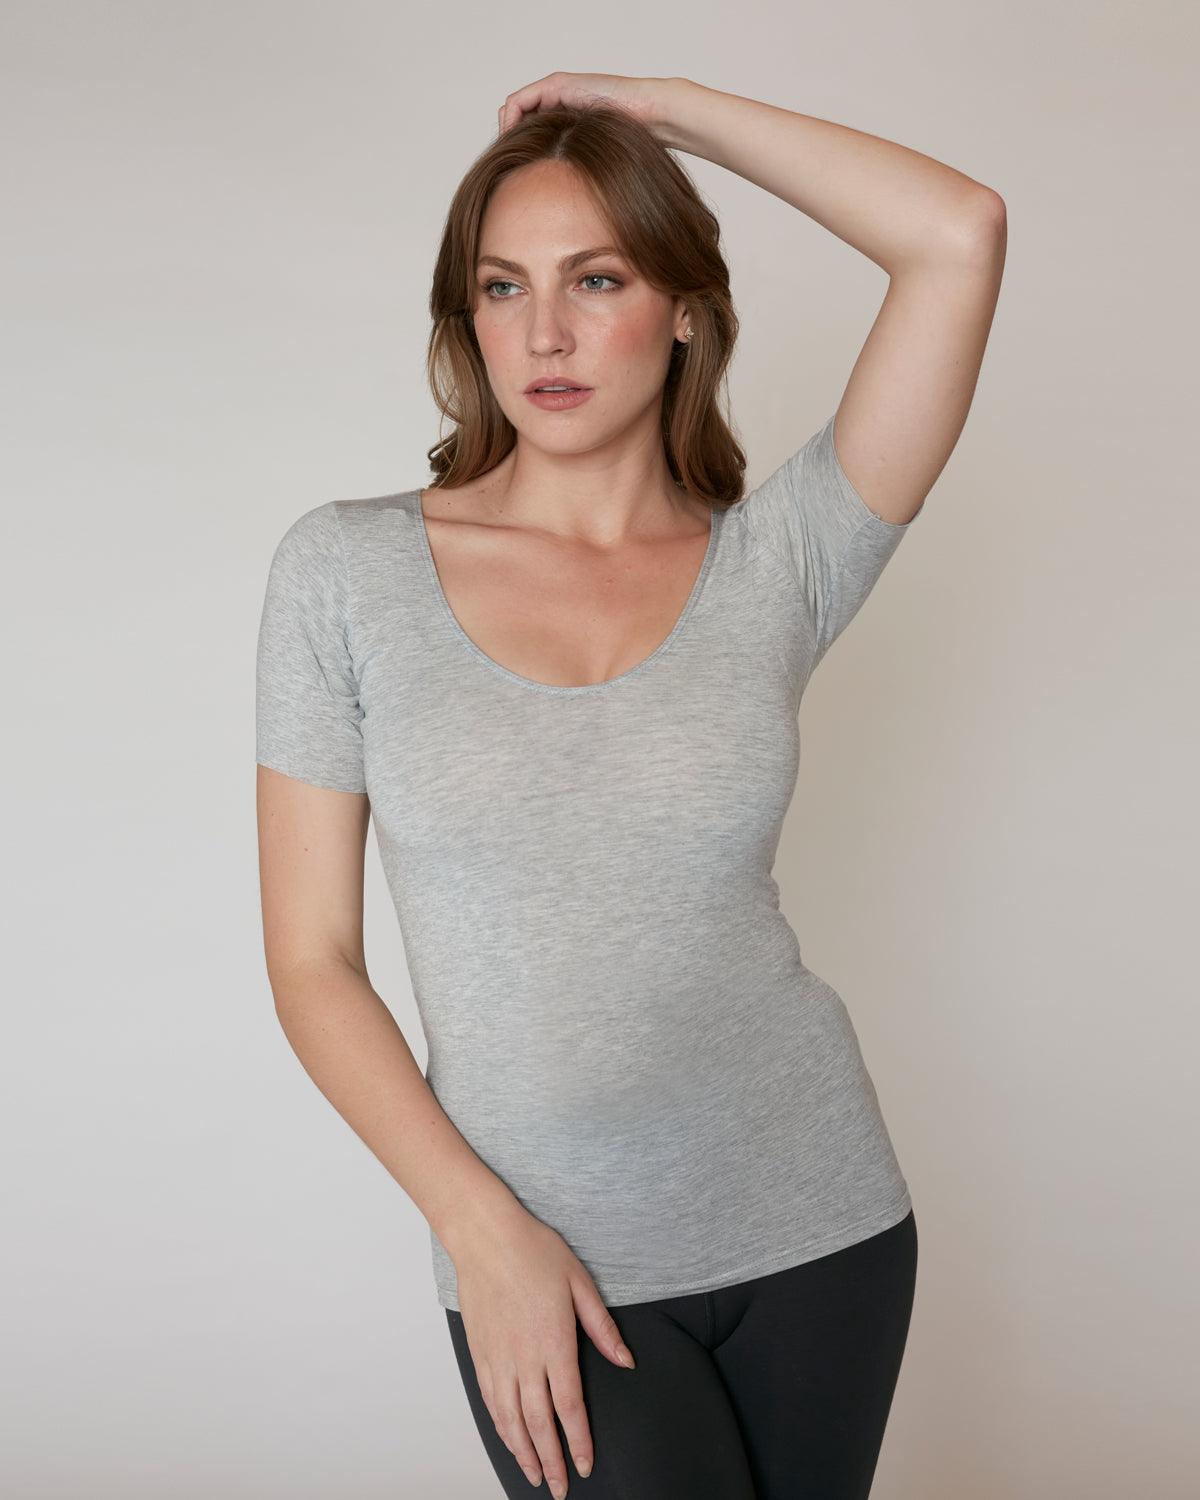 "#color_heathergrey| Siobhan is 5'8.5" and wears a size S